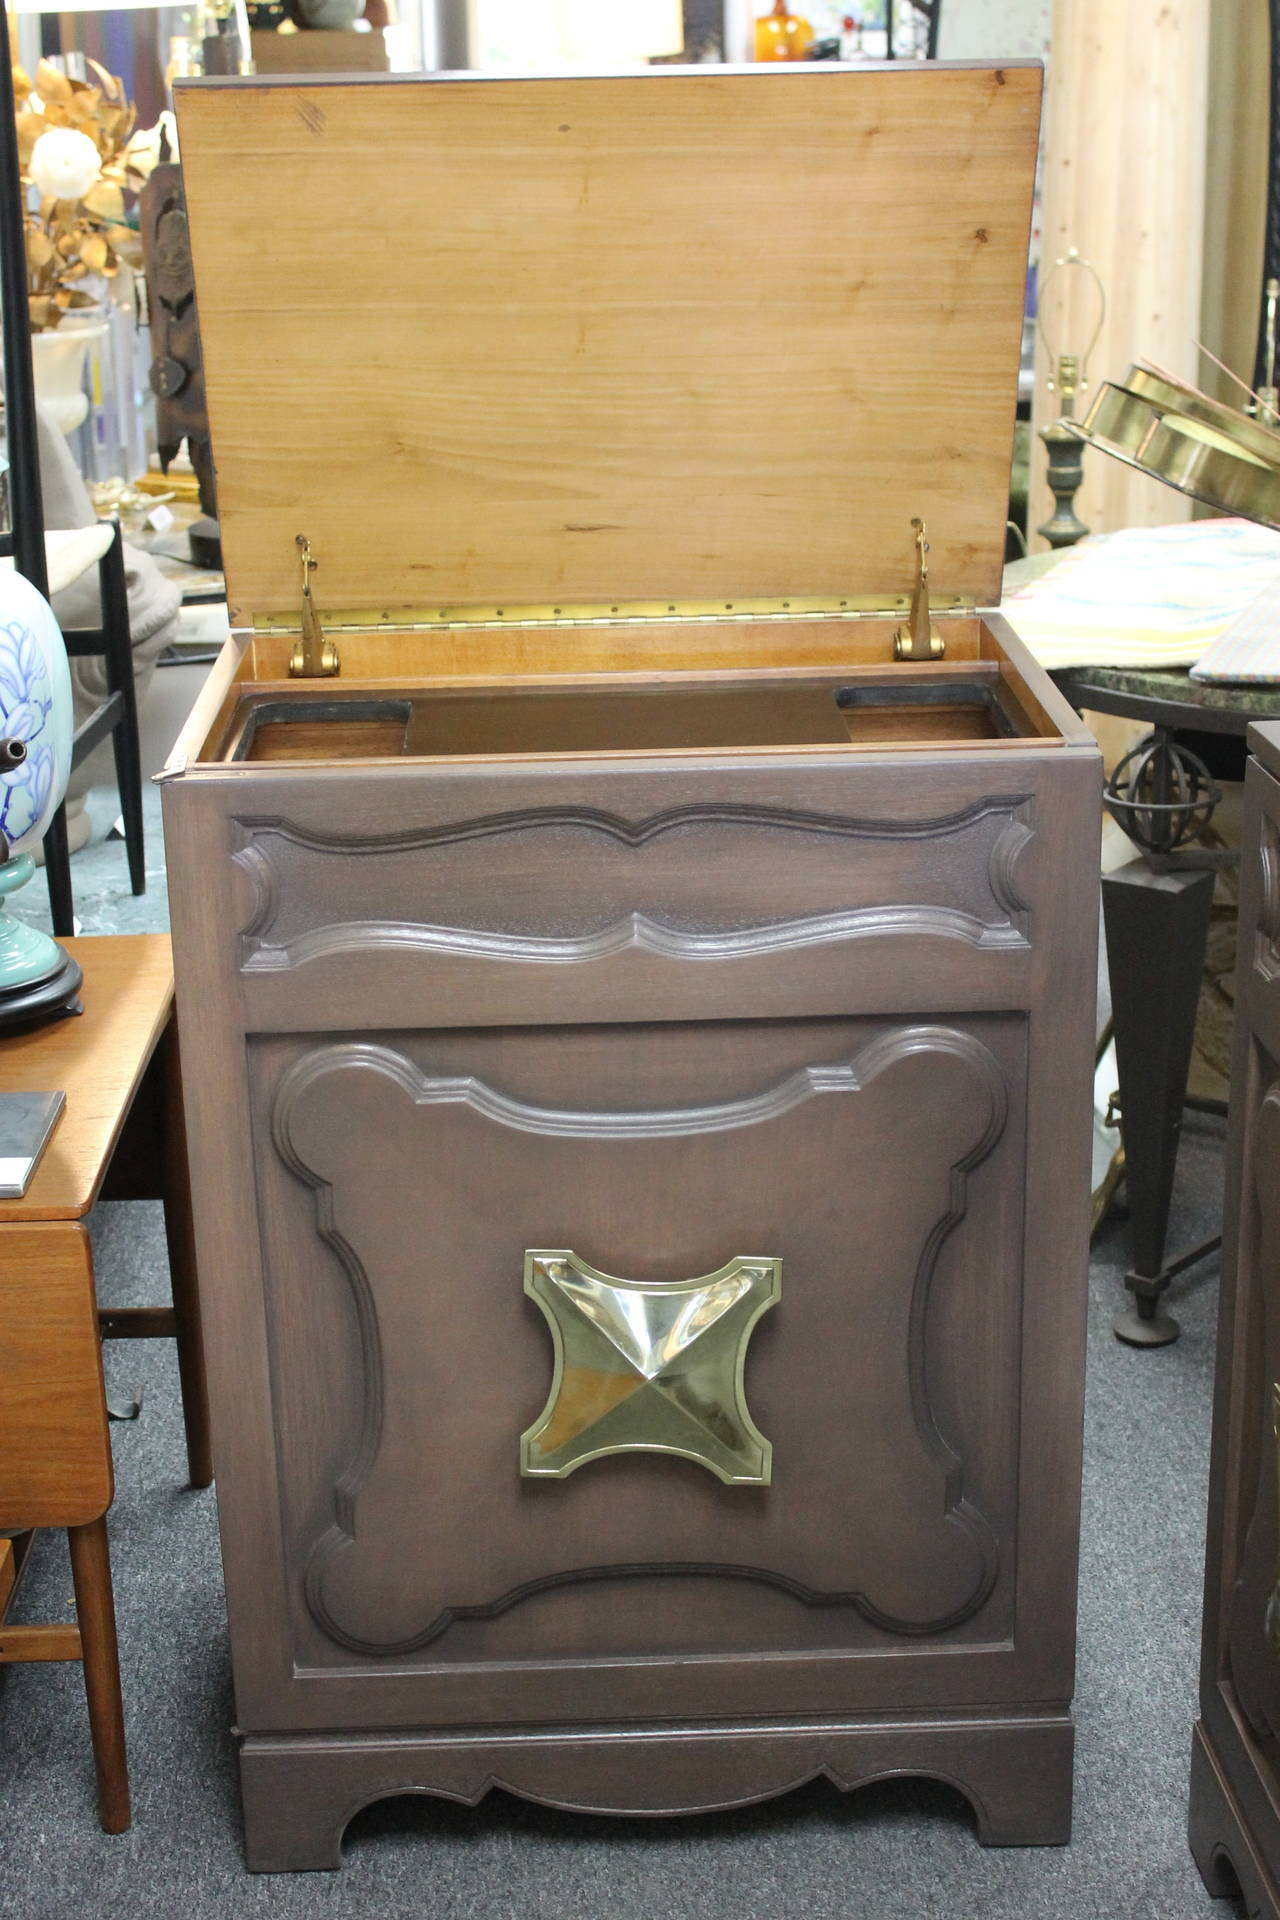 Grosfeld house cabinet or bar with original brass handle. Bar has been refinished on the outside. We left the inside all original. There are two inserts where we believe glass inserts were used. They are not available.